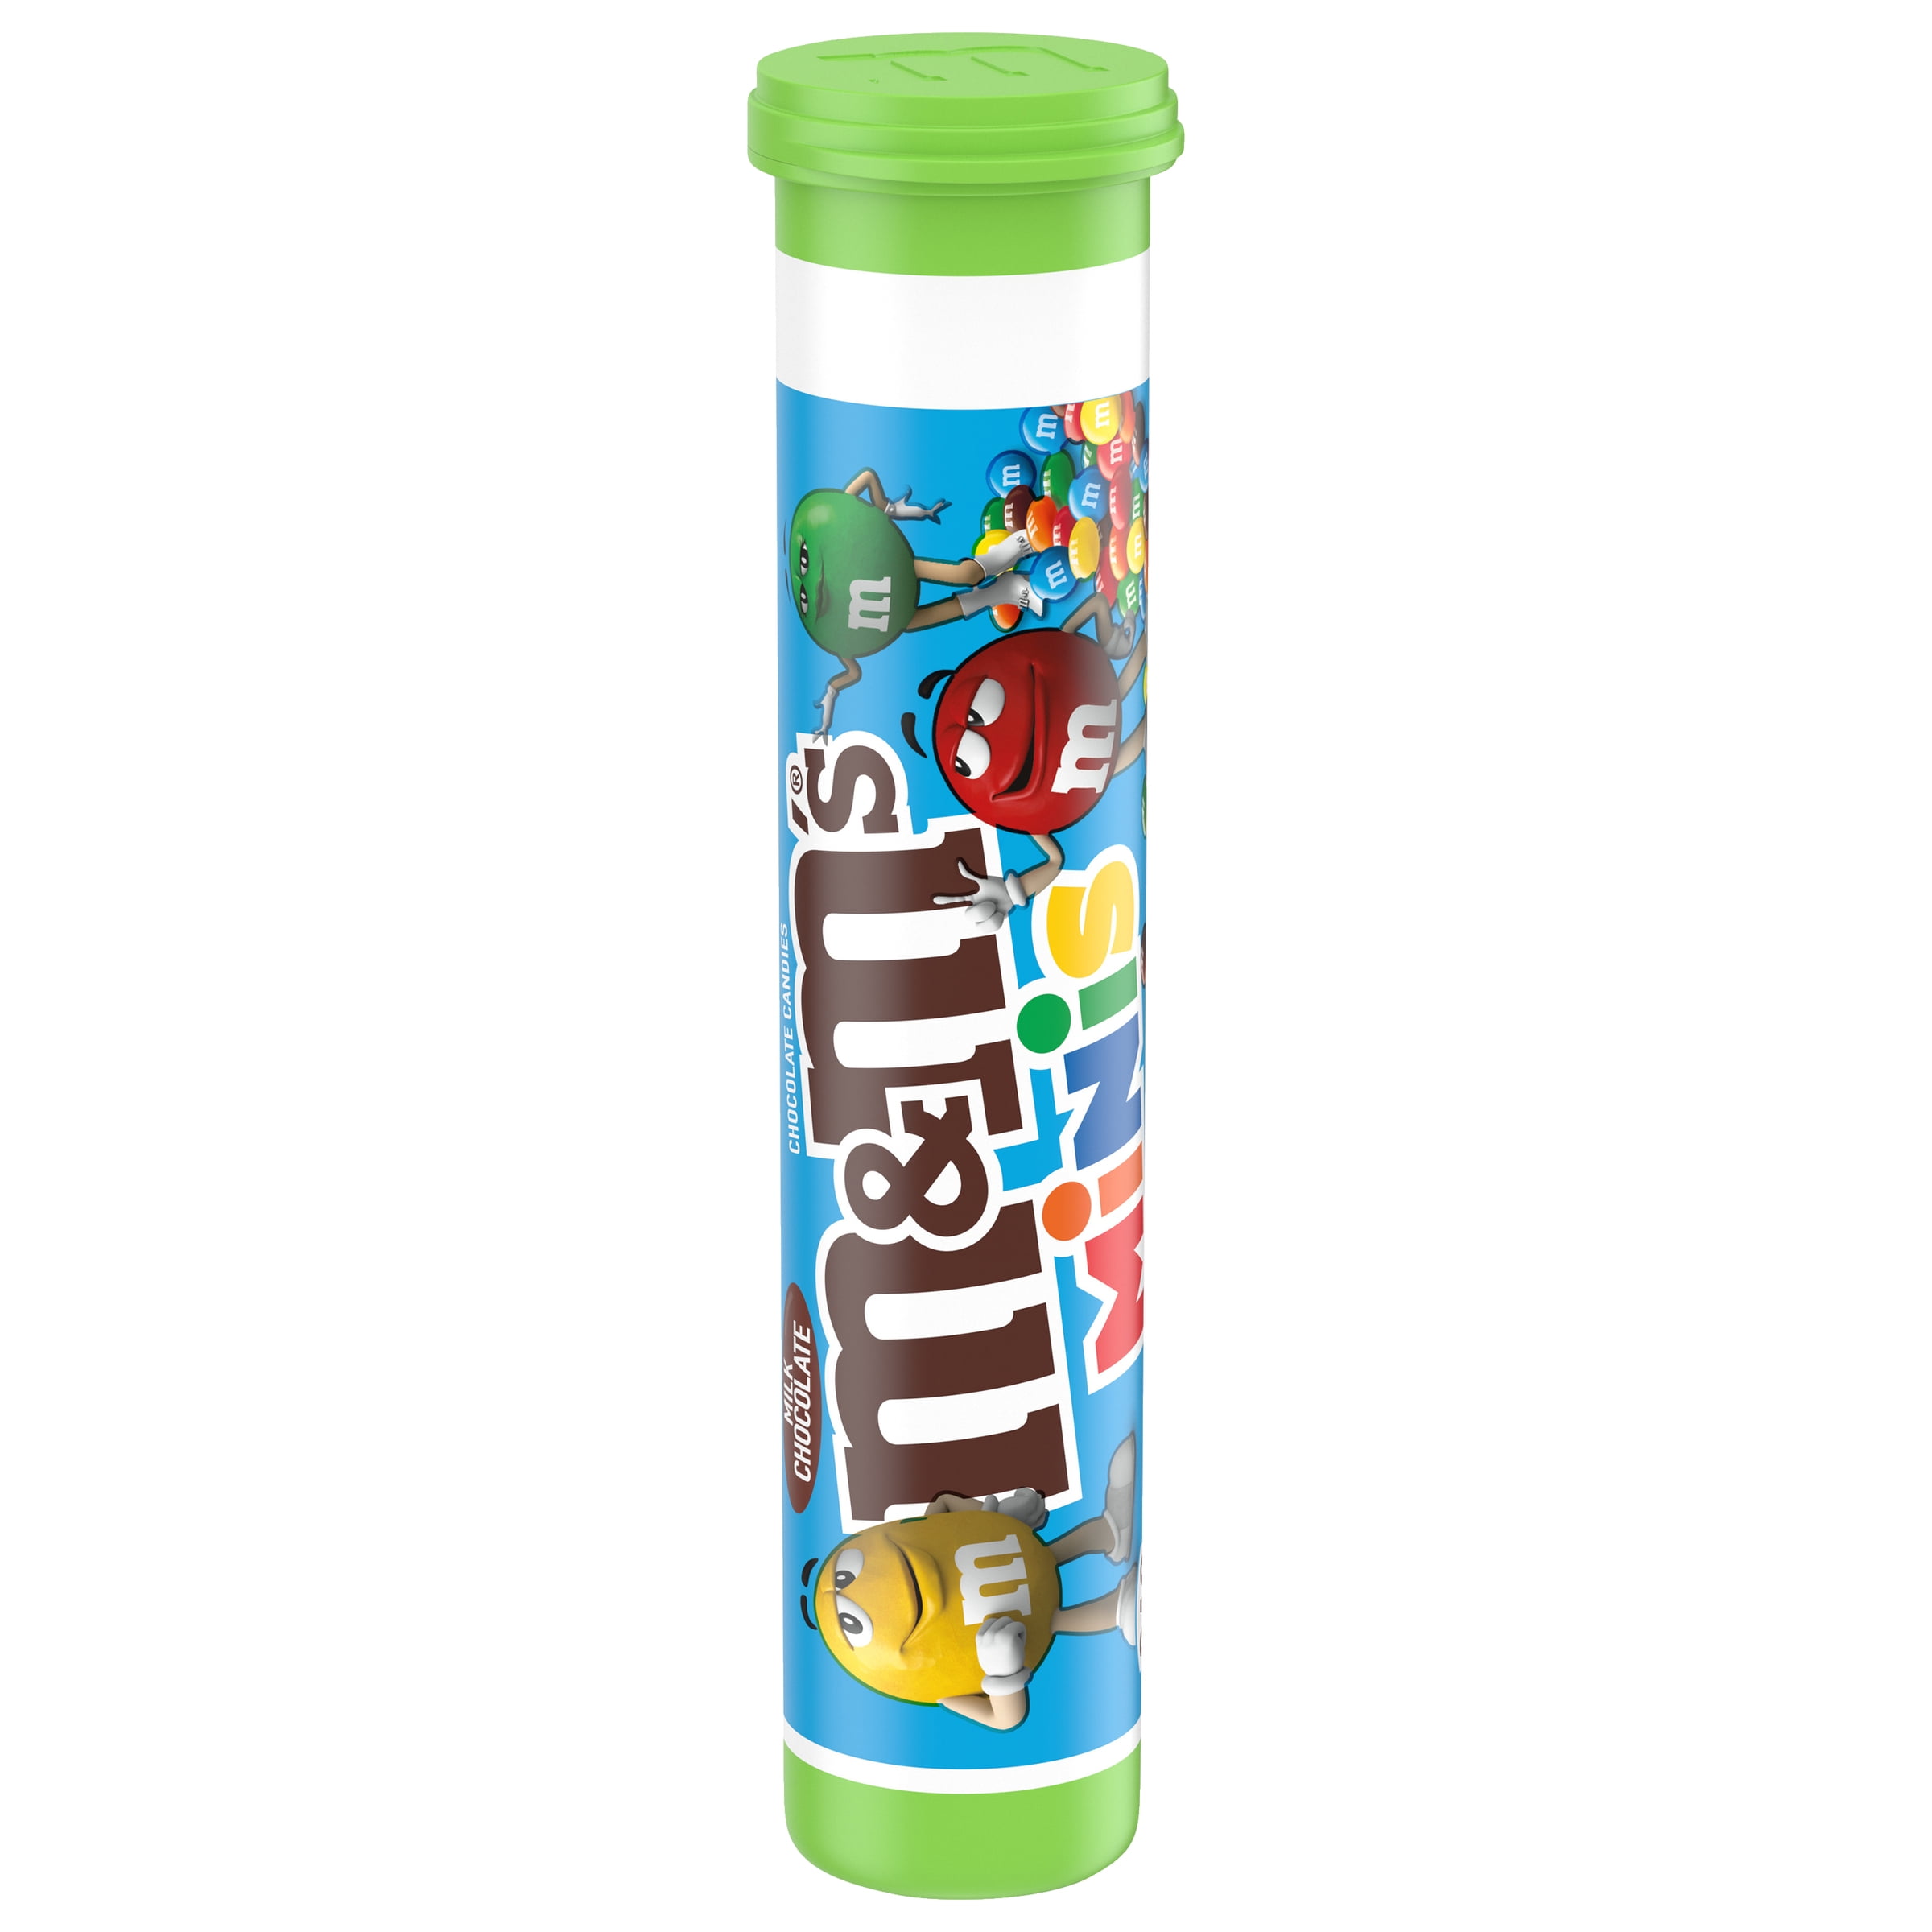 M&Ms Minis In a Mega Tube - Does That Make Any Sense? (Snacking On